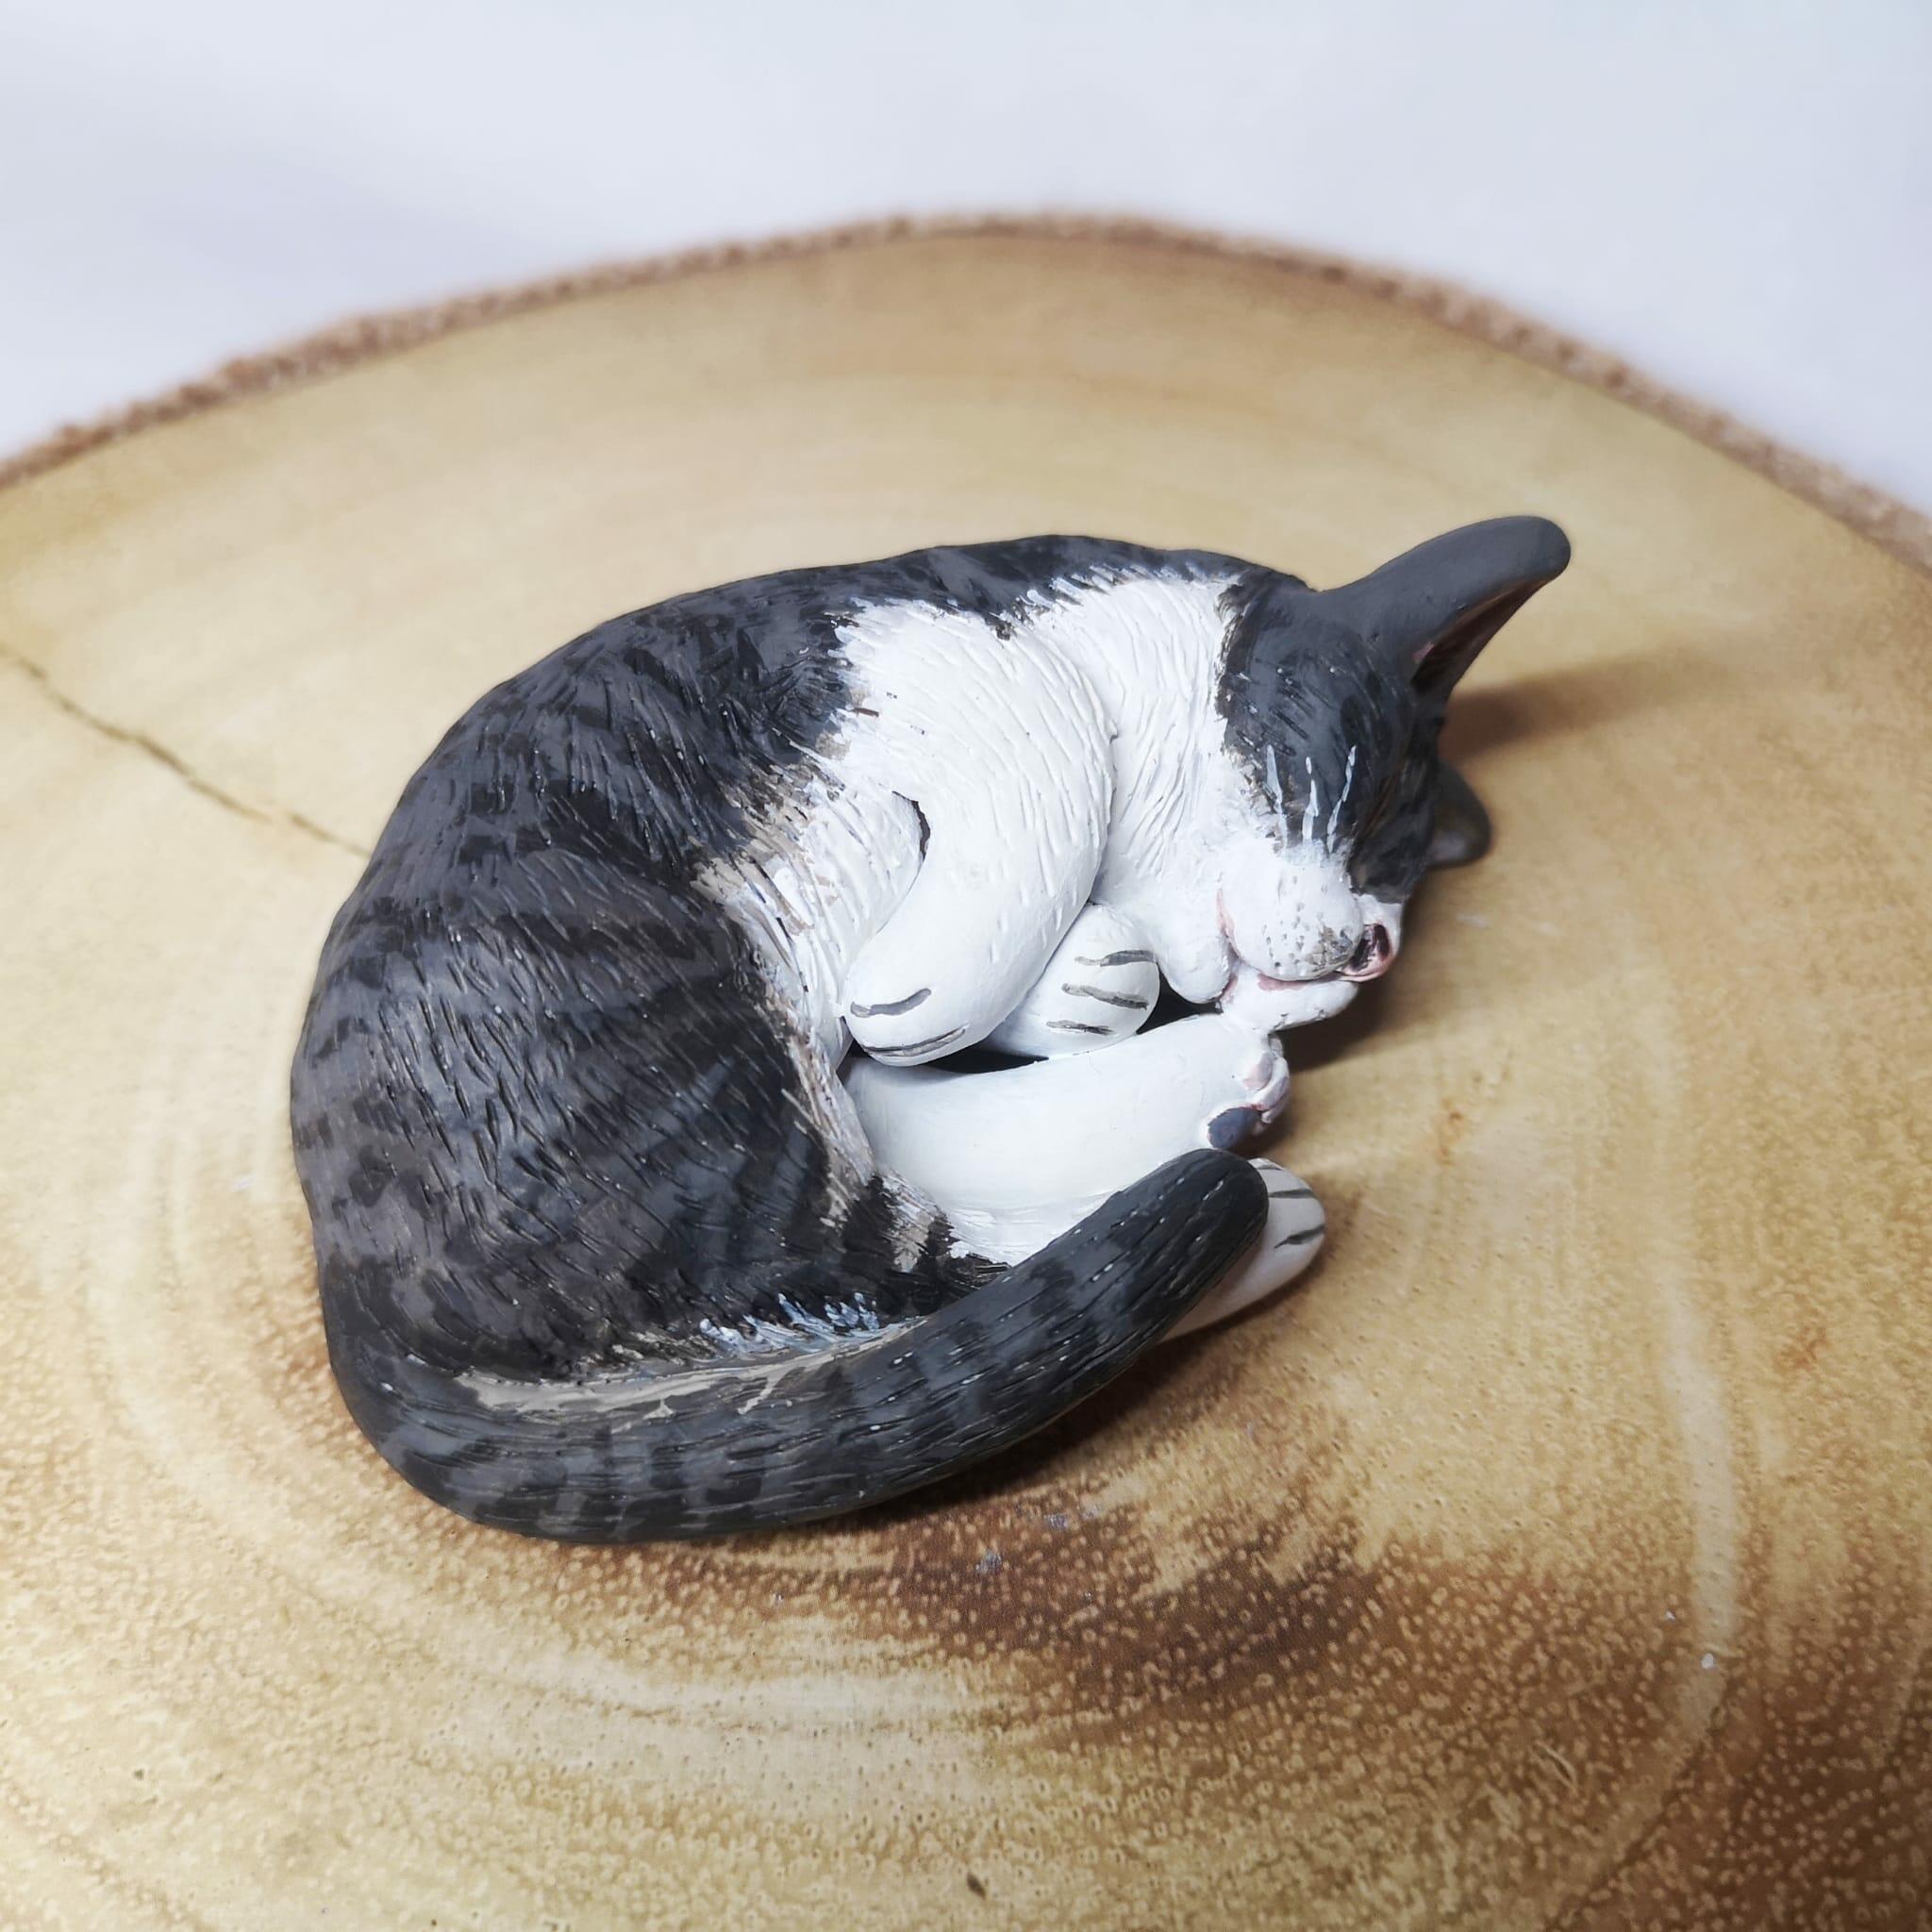 Handmade and handpainted clay model of a cat asleep, showcasing a lifelike representation of a cat in a natural sleeping position with eyes closed and body relaxed. Personalized and unique, this clay model captures the essence of a feline friend, conveying a sense of tranquility and contentment